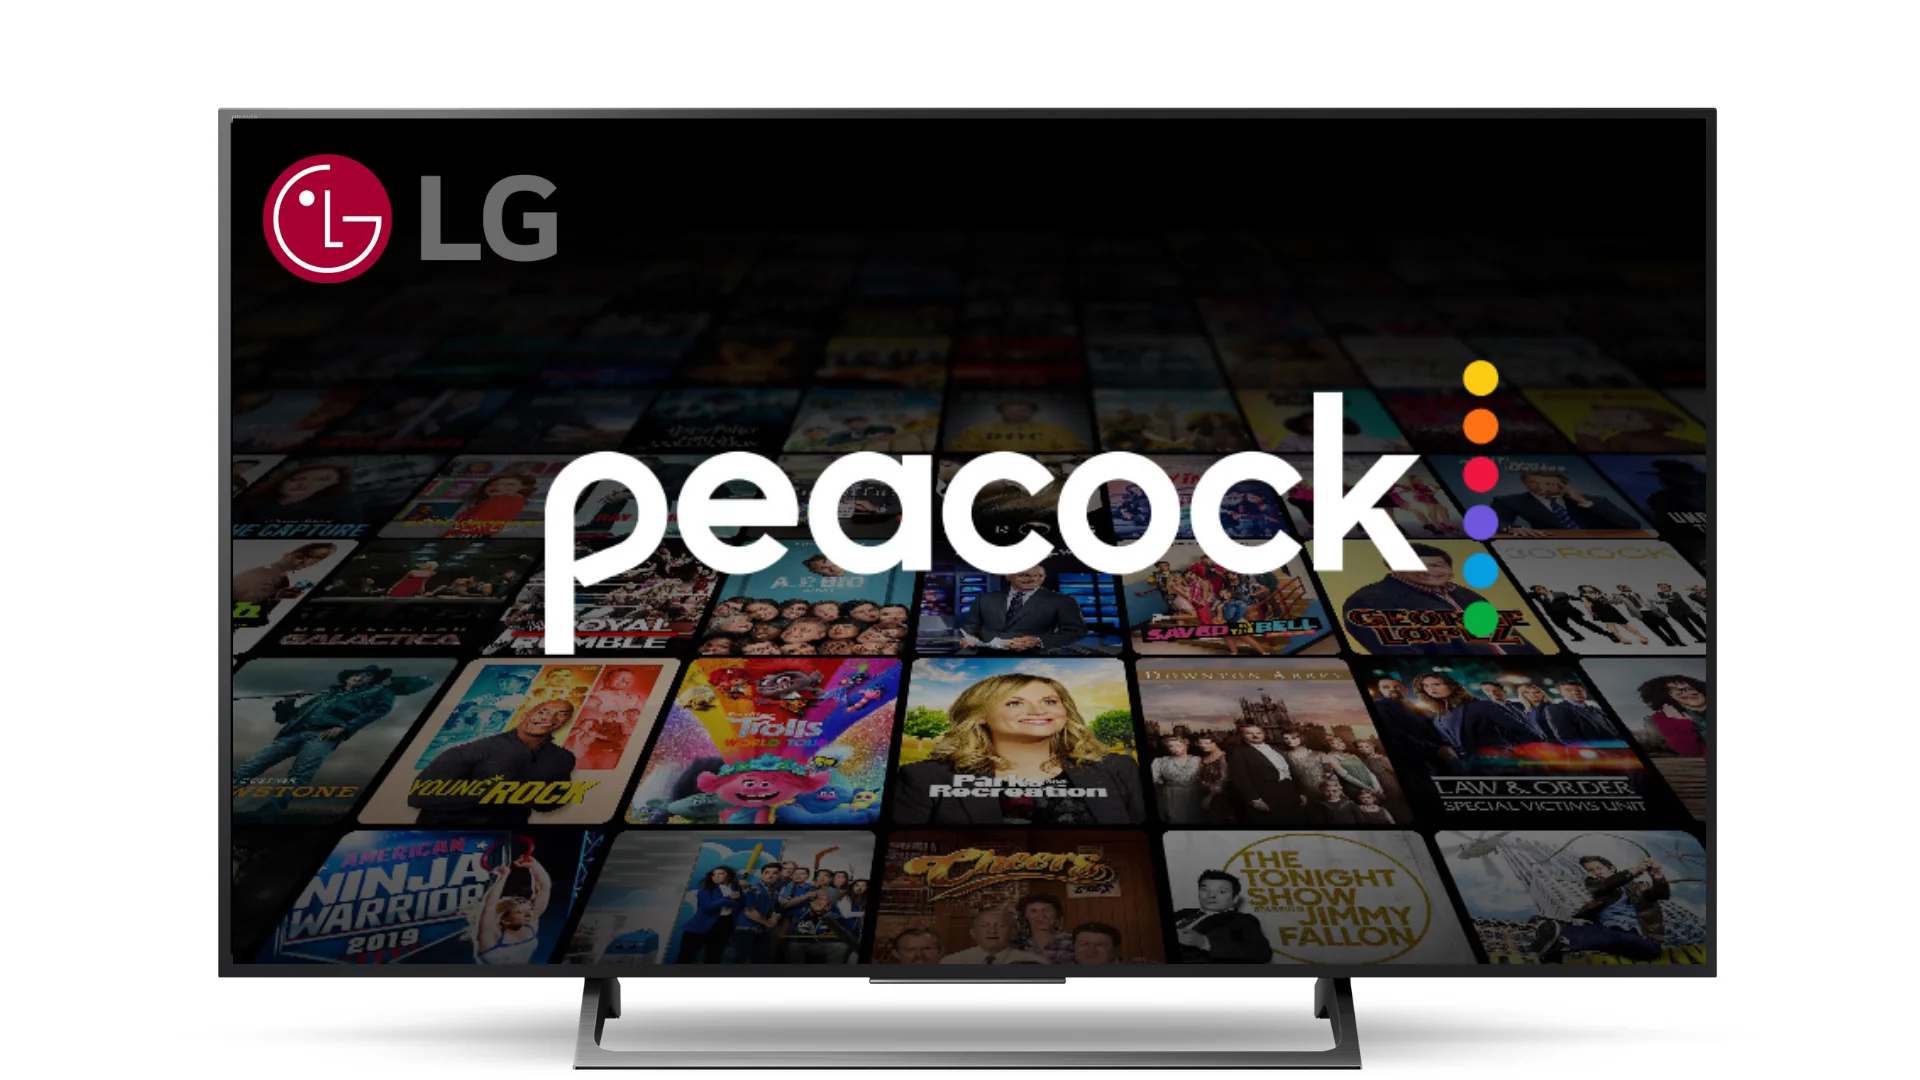 How To Watch Peacock TV On LG Smart TV